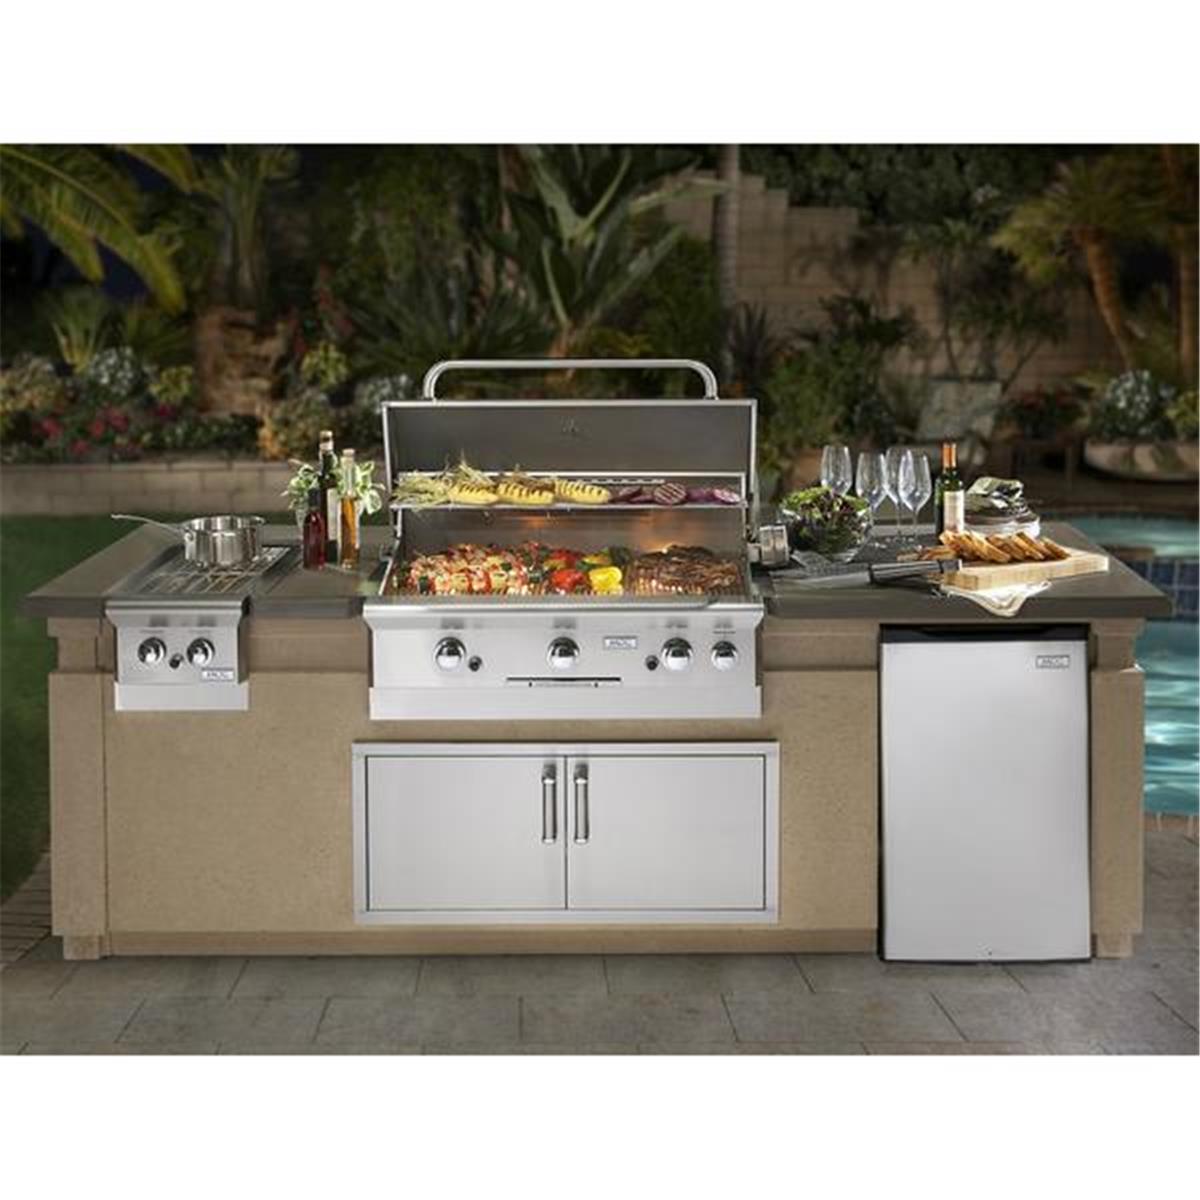 Picture of American Outdoor Grill AD-24C 24 in. Adaptor for Grill Required for Kitchen Island